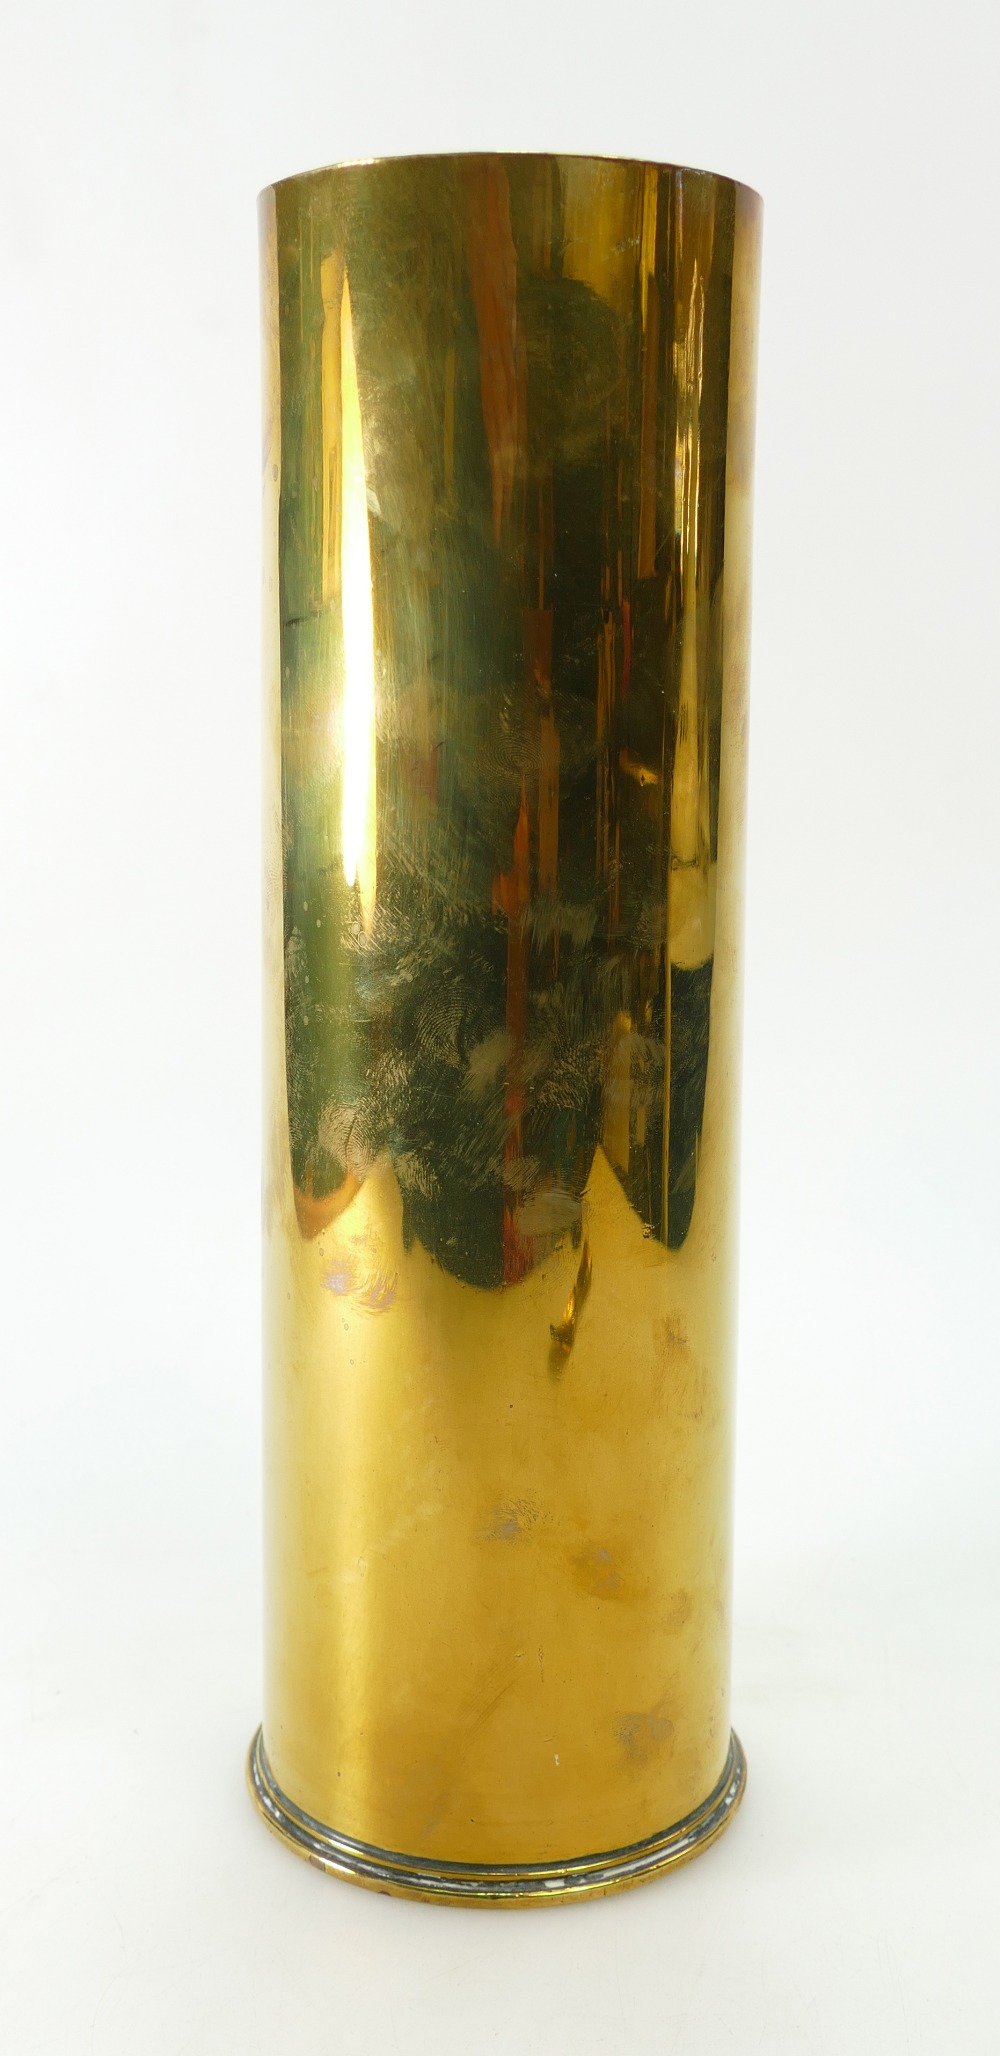 Brass 4" Naval Shell case marked 1916, 18 Pr II, 29-9-16 and FVU 29.5cm in height.